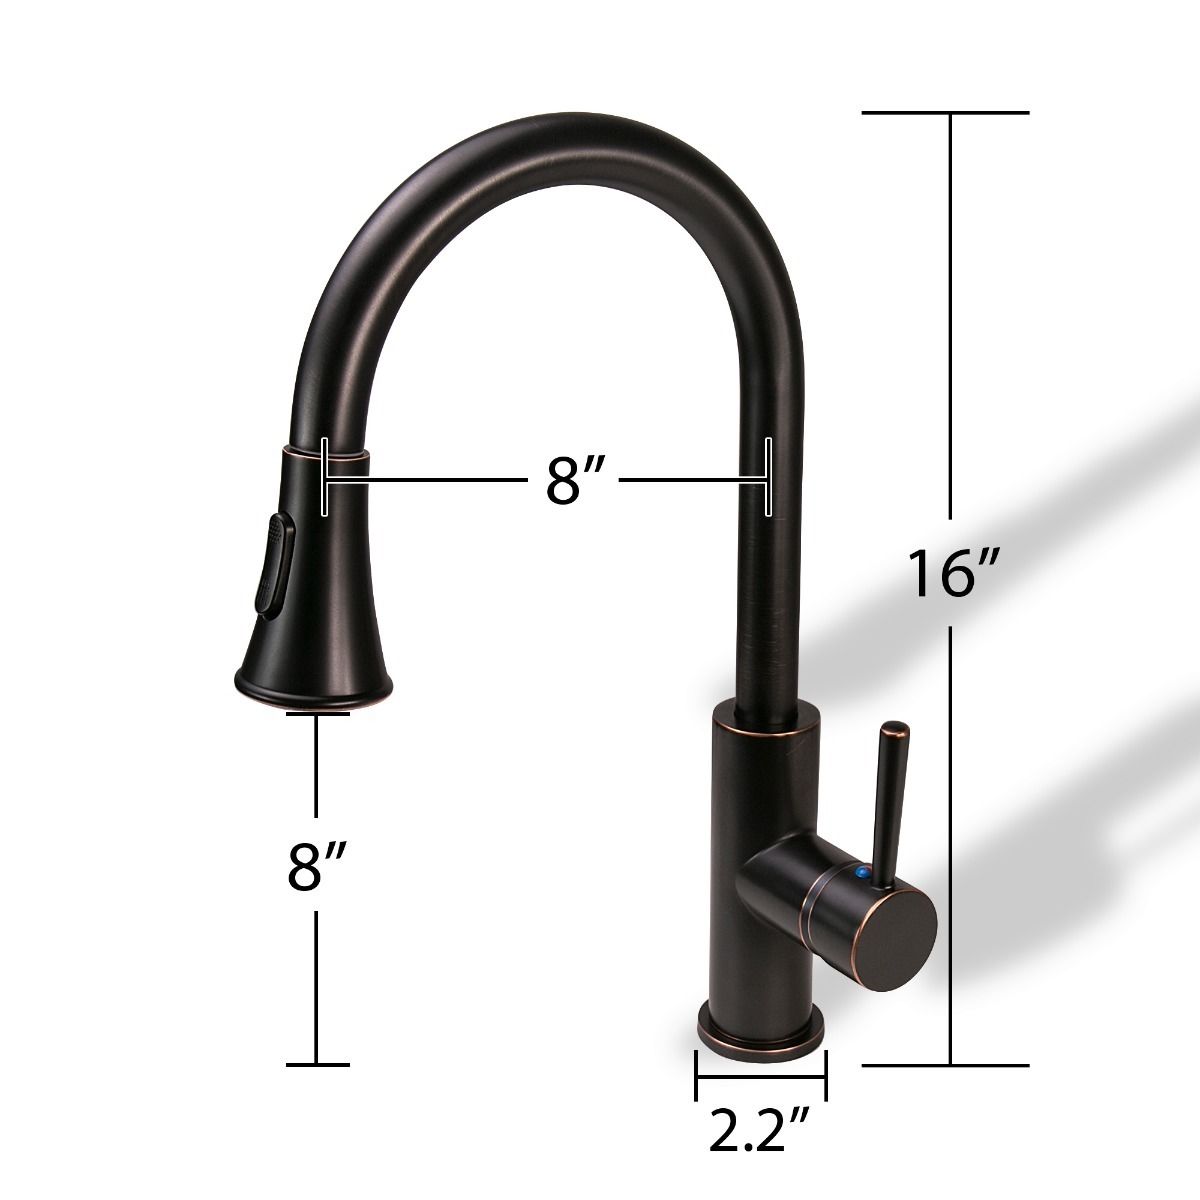 León Oil Rubbed Bronze Kitchen Sink Faucet with Pull Down Spout